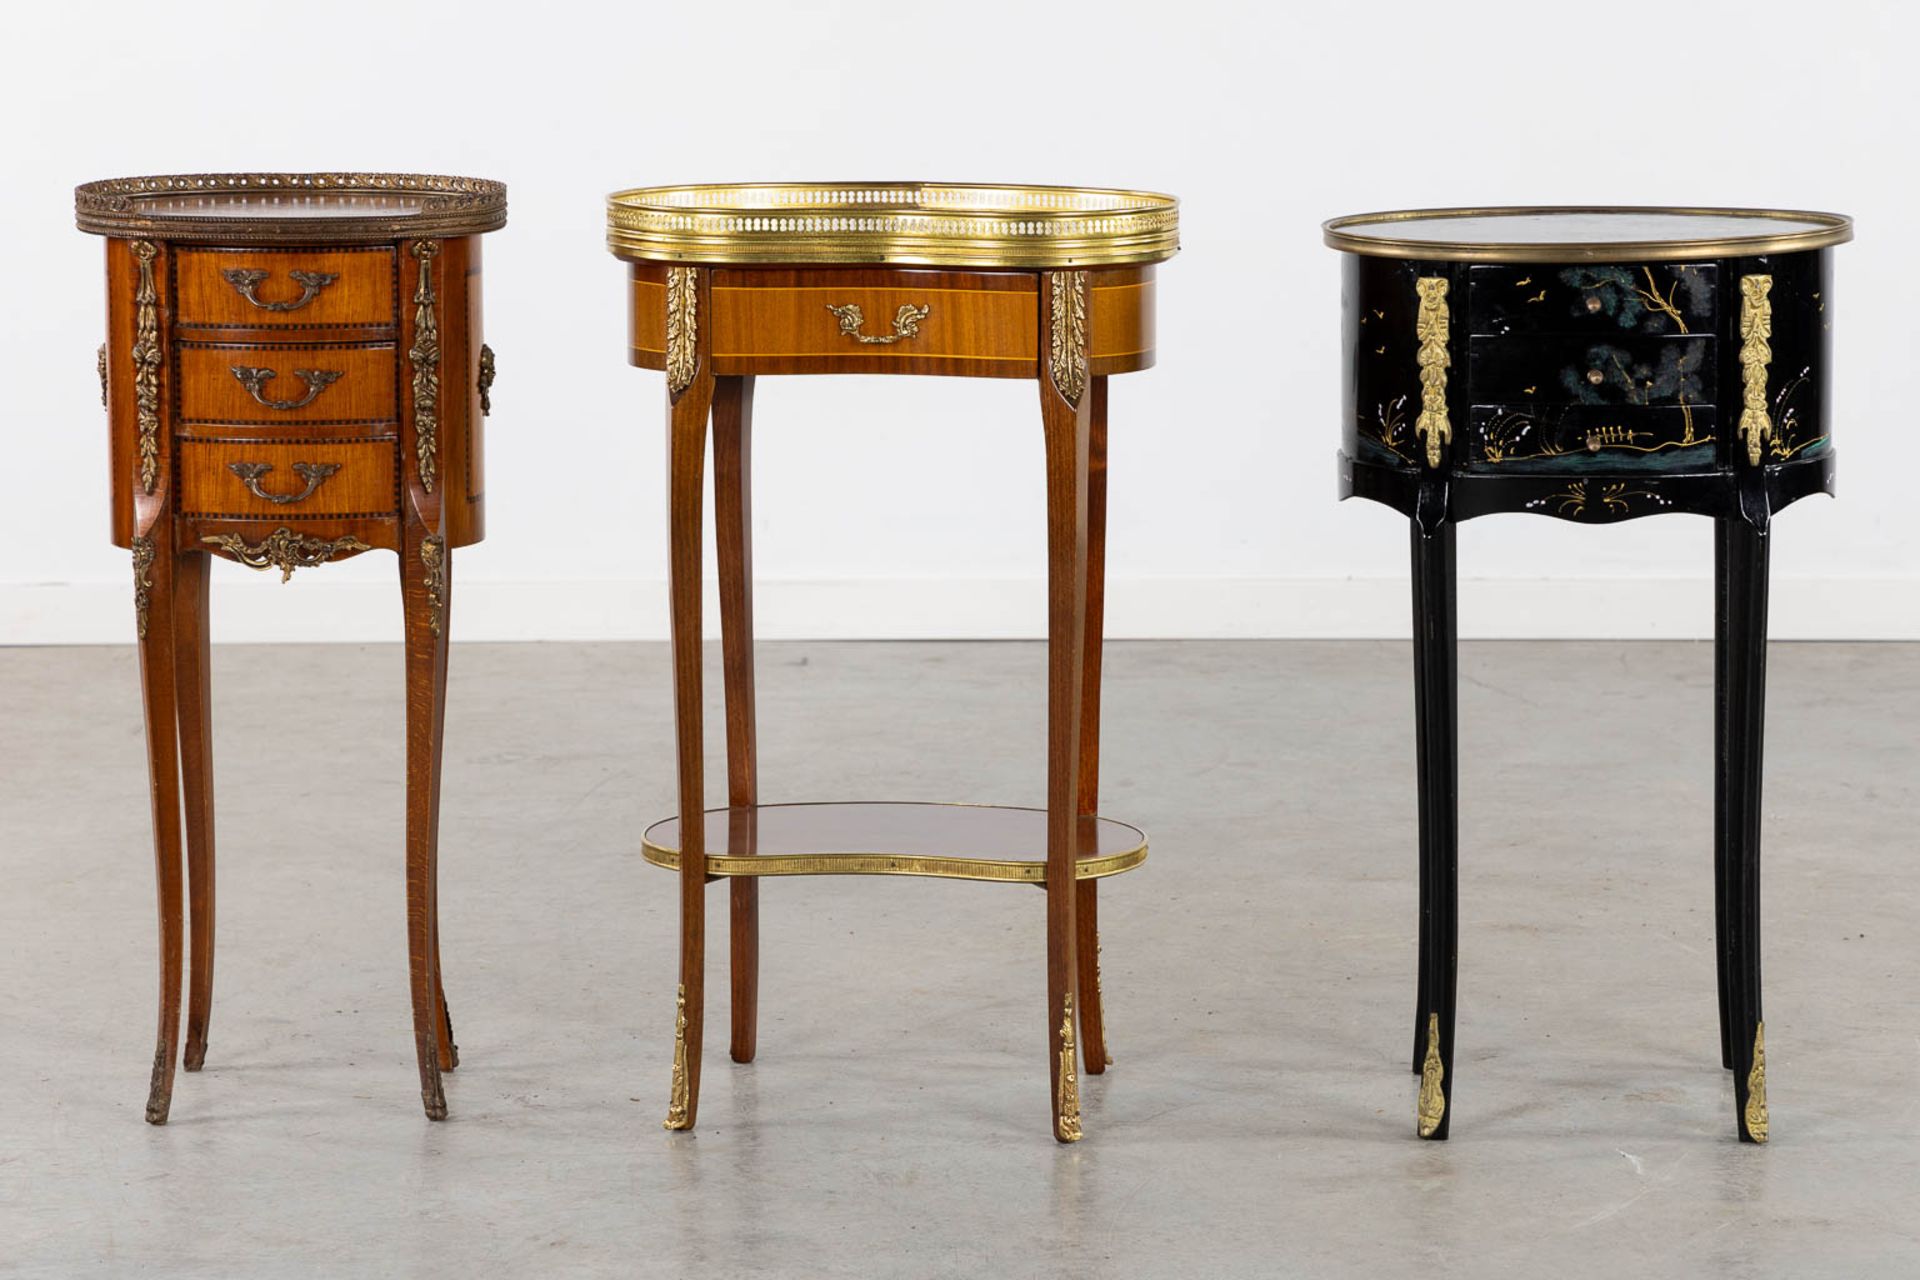 Three small side tables, marquetry and painted decor. 20th C. (L:30 x W:44 x H:71 cm) - Image 4 of 14